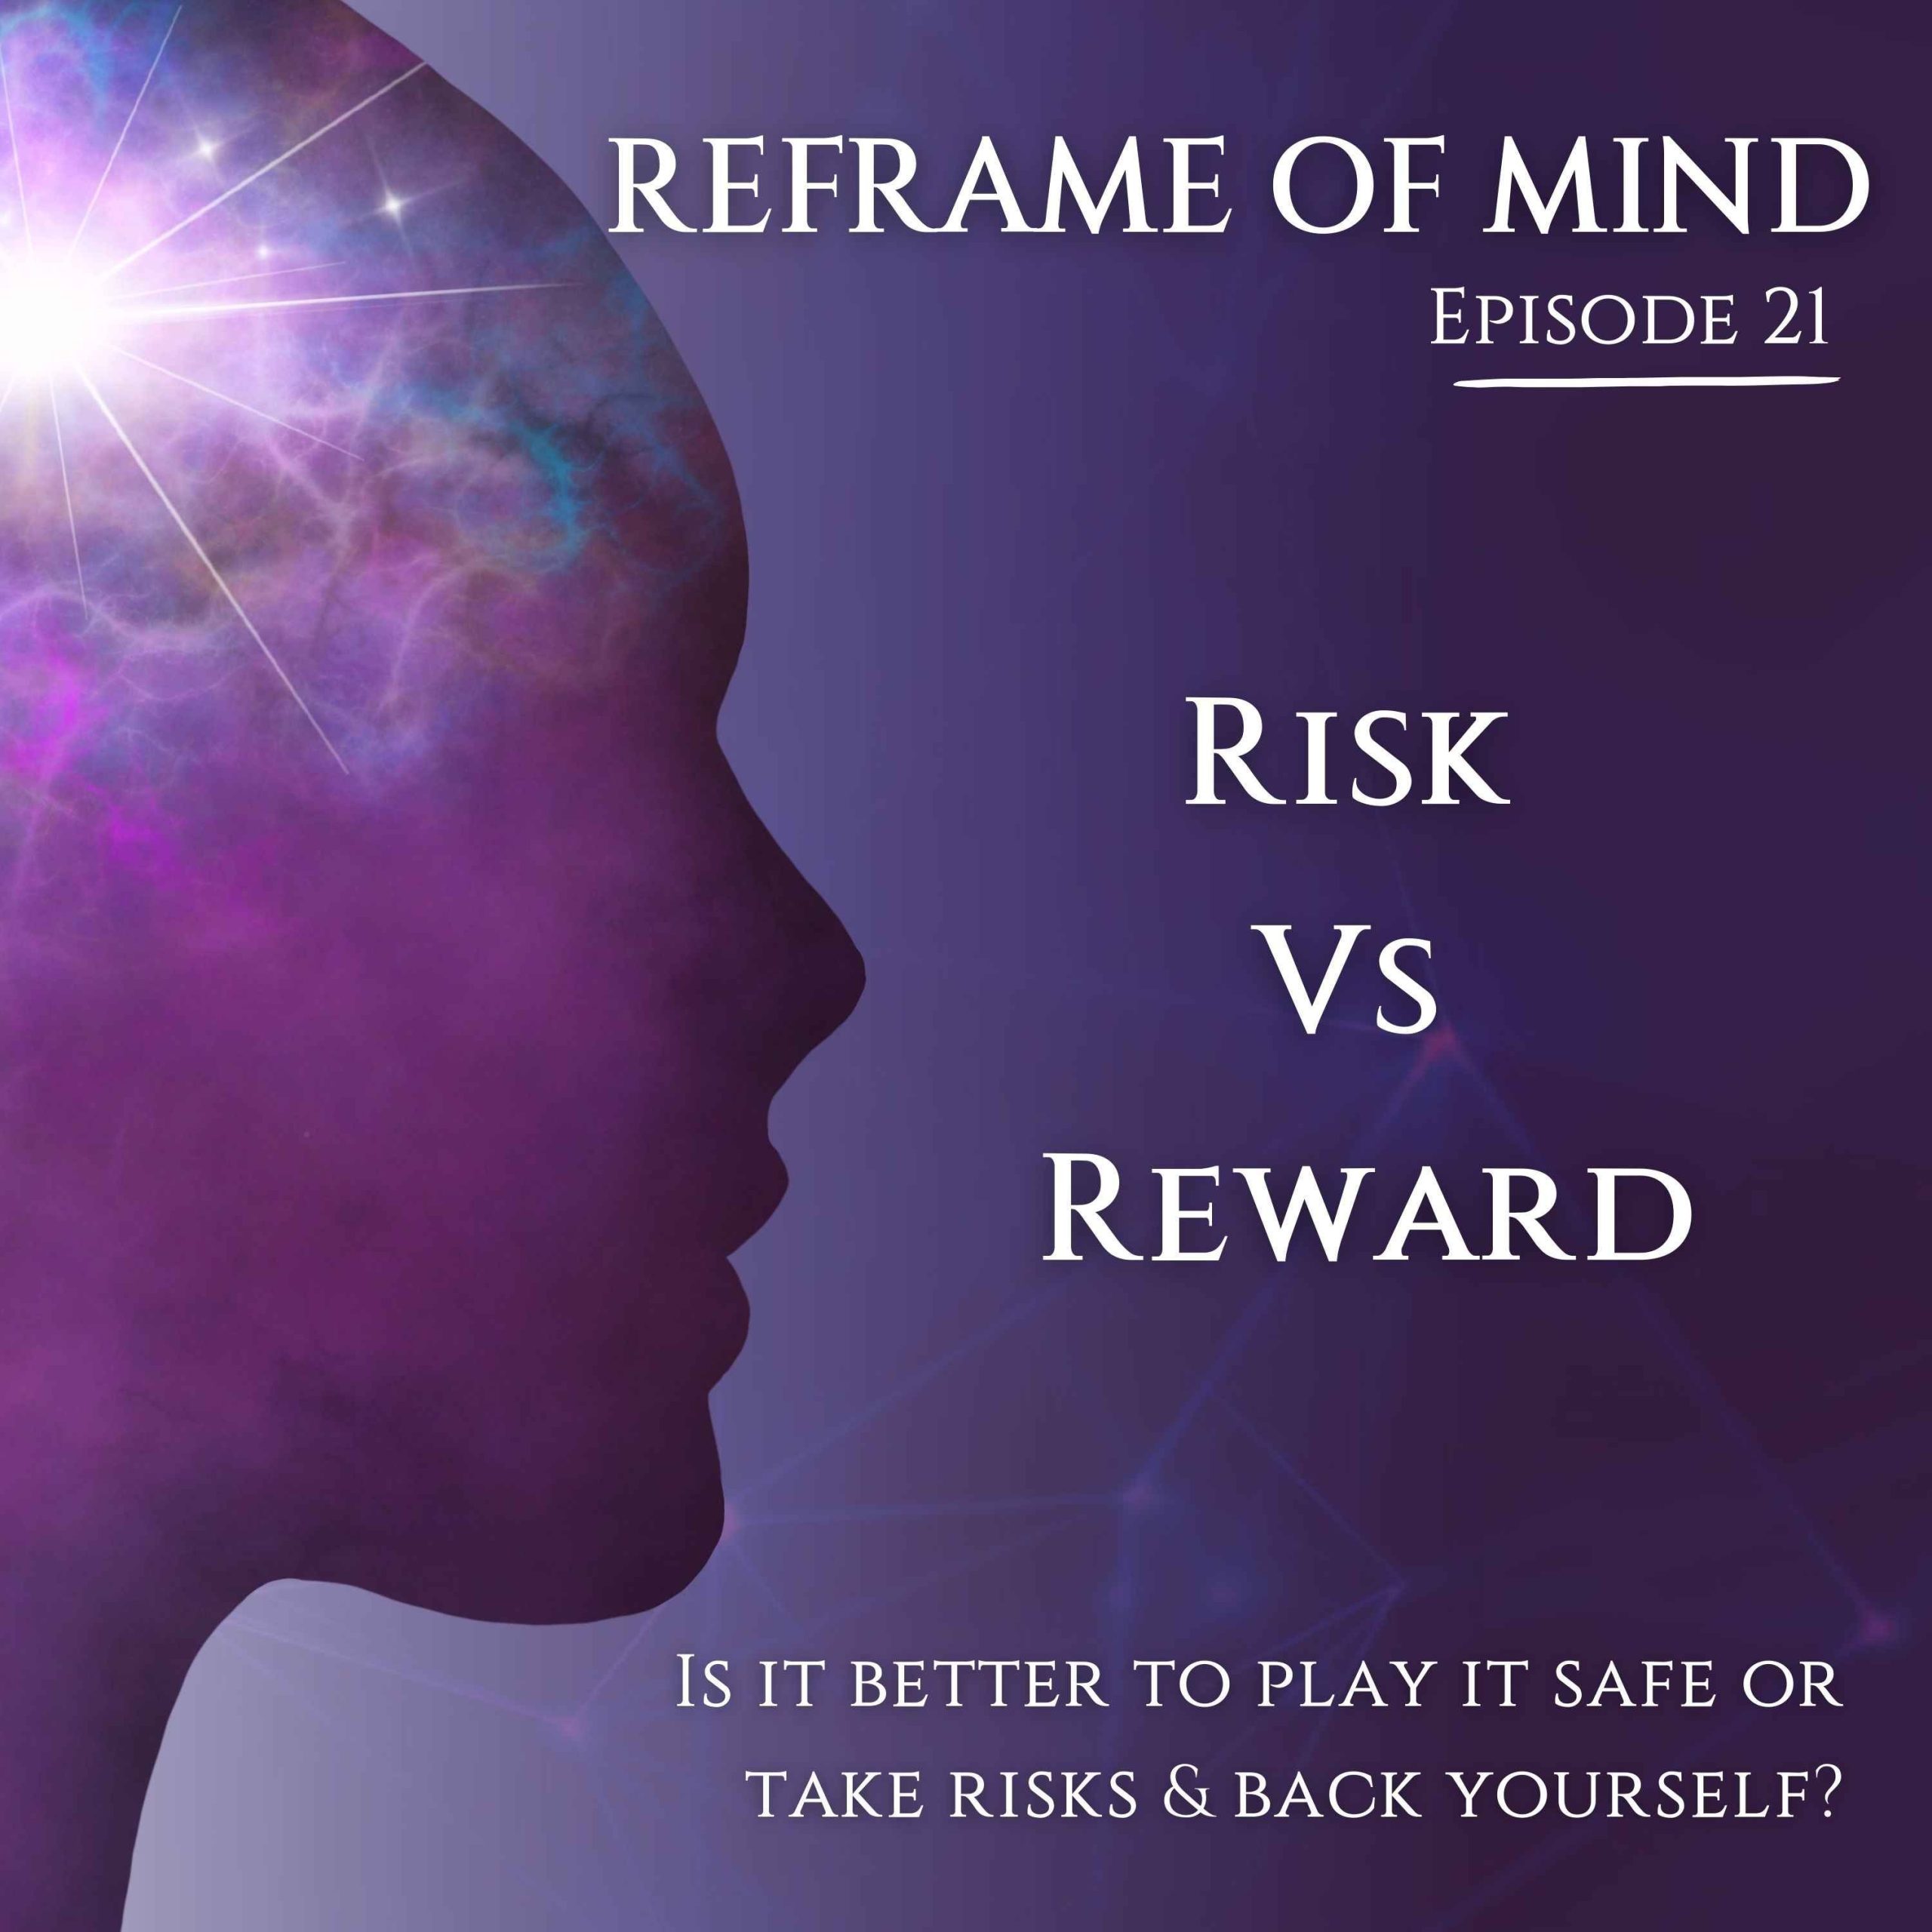 Risk Vs Reward. Is it better to play it safe or take risks?